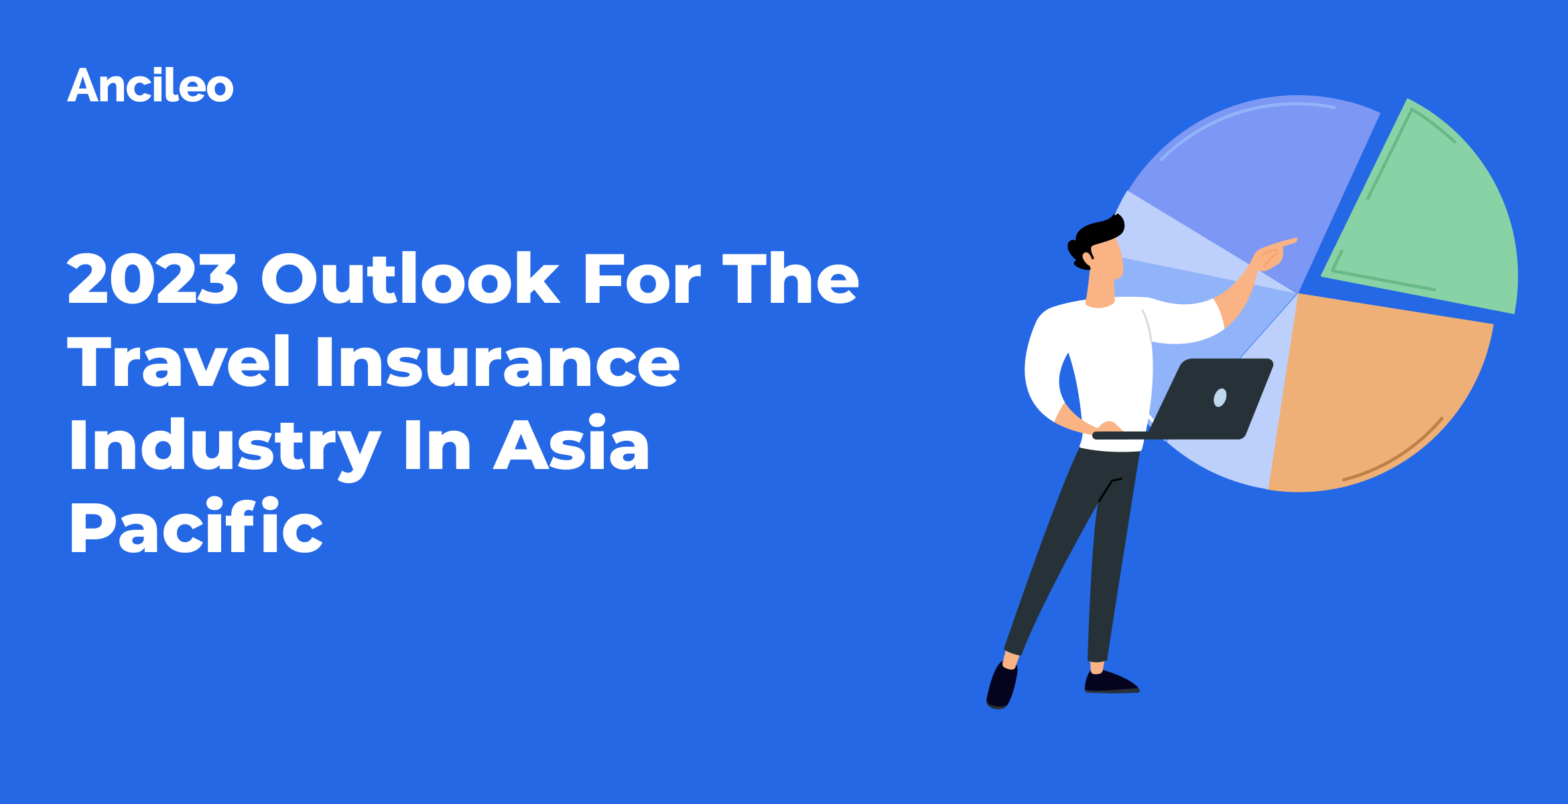 2023 Outlook For The Travel Insurance Industry In Asia Pacific